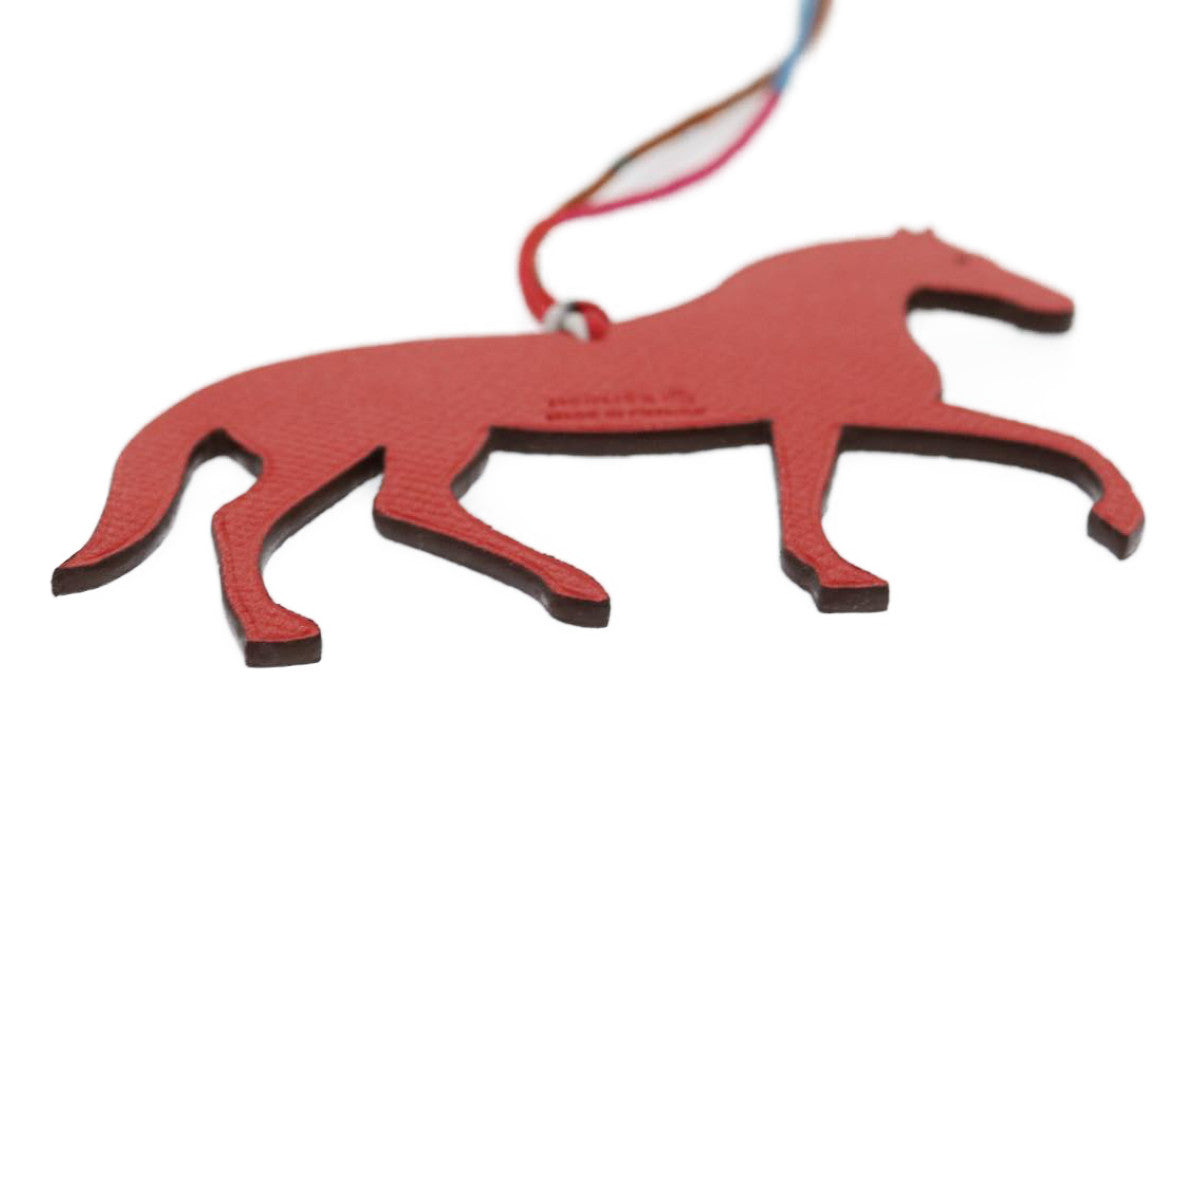 HERMES petit ache cheval Bag Charm horse-type Epsom Red Black Auth 30991A